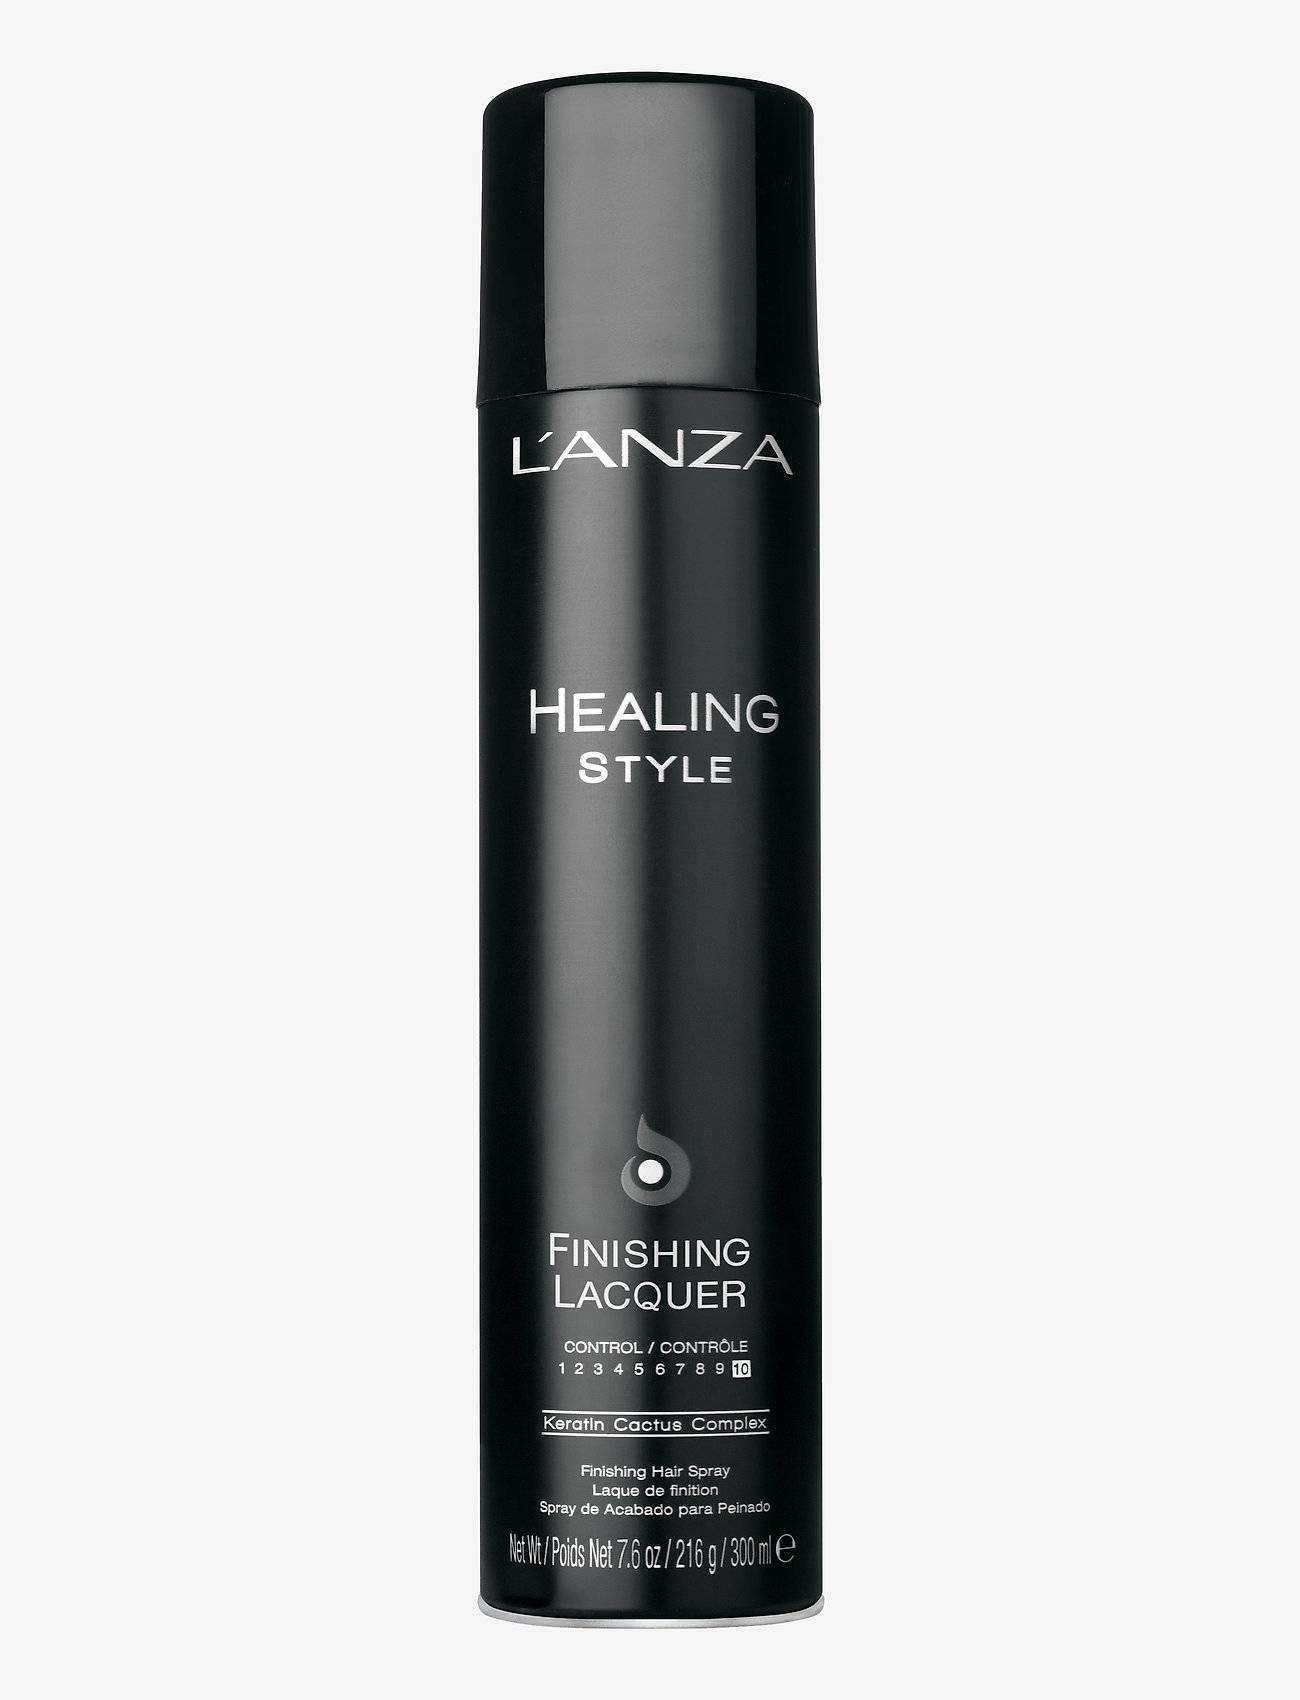 L'Anza Healing Hair Color & Care - Finishing Lacquer - no color - 0